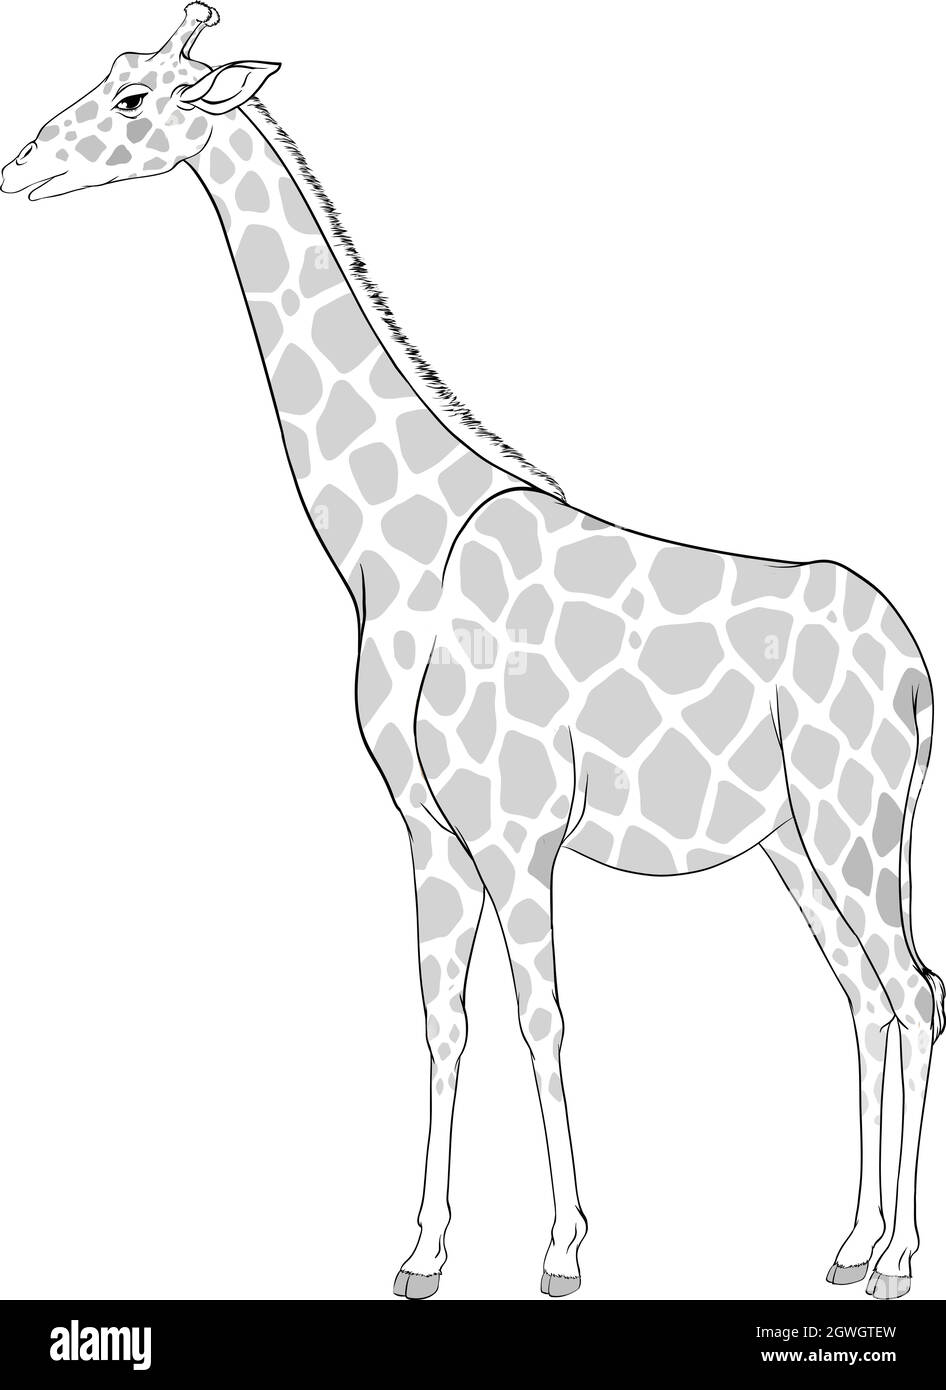 Cute Giraffe Coloring Page Vector Illustration On White Stock Illustration  - Download Image Now - iStock